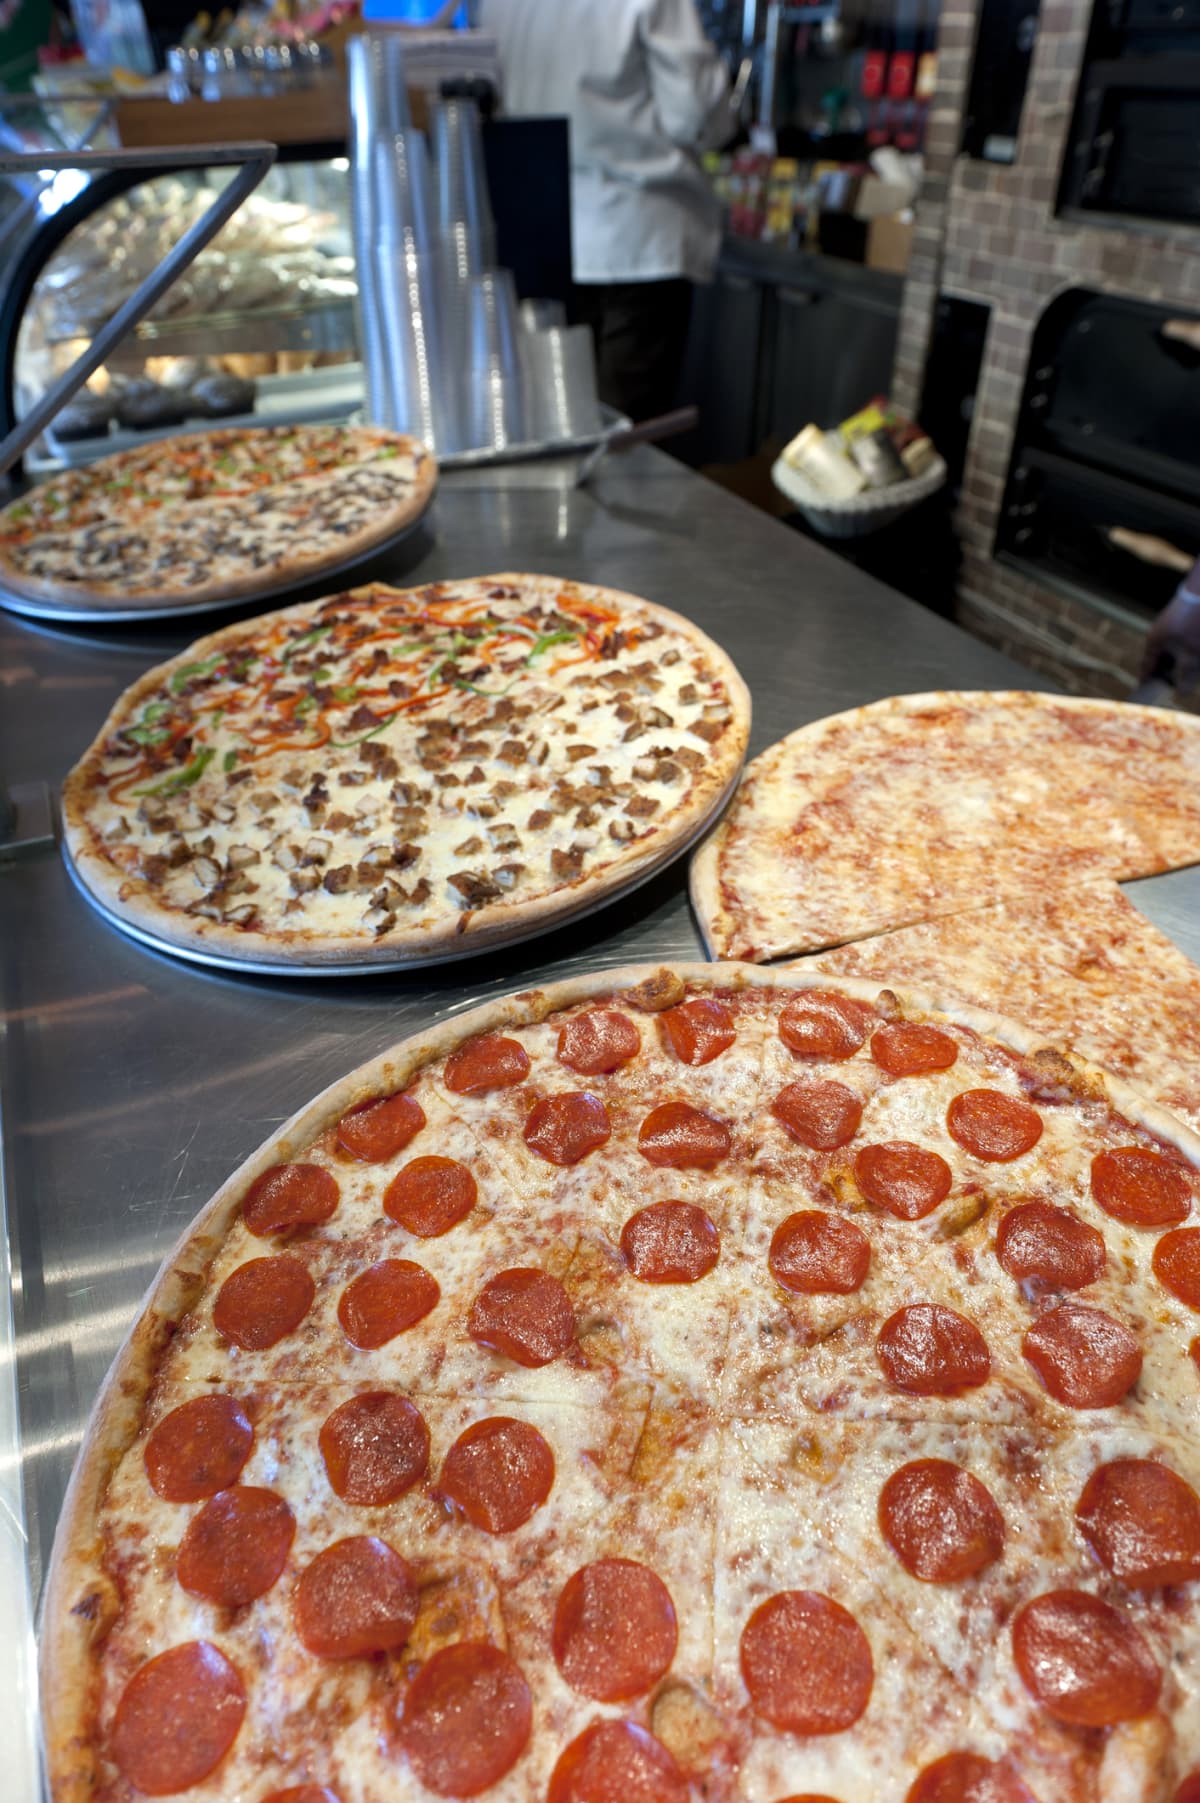 Large pizzas on a metal counter